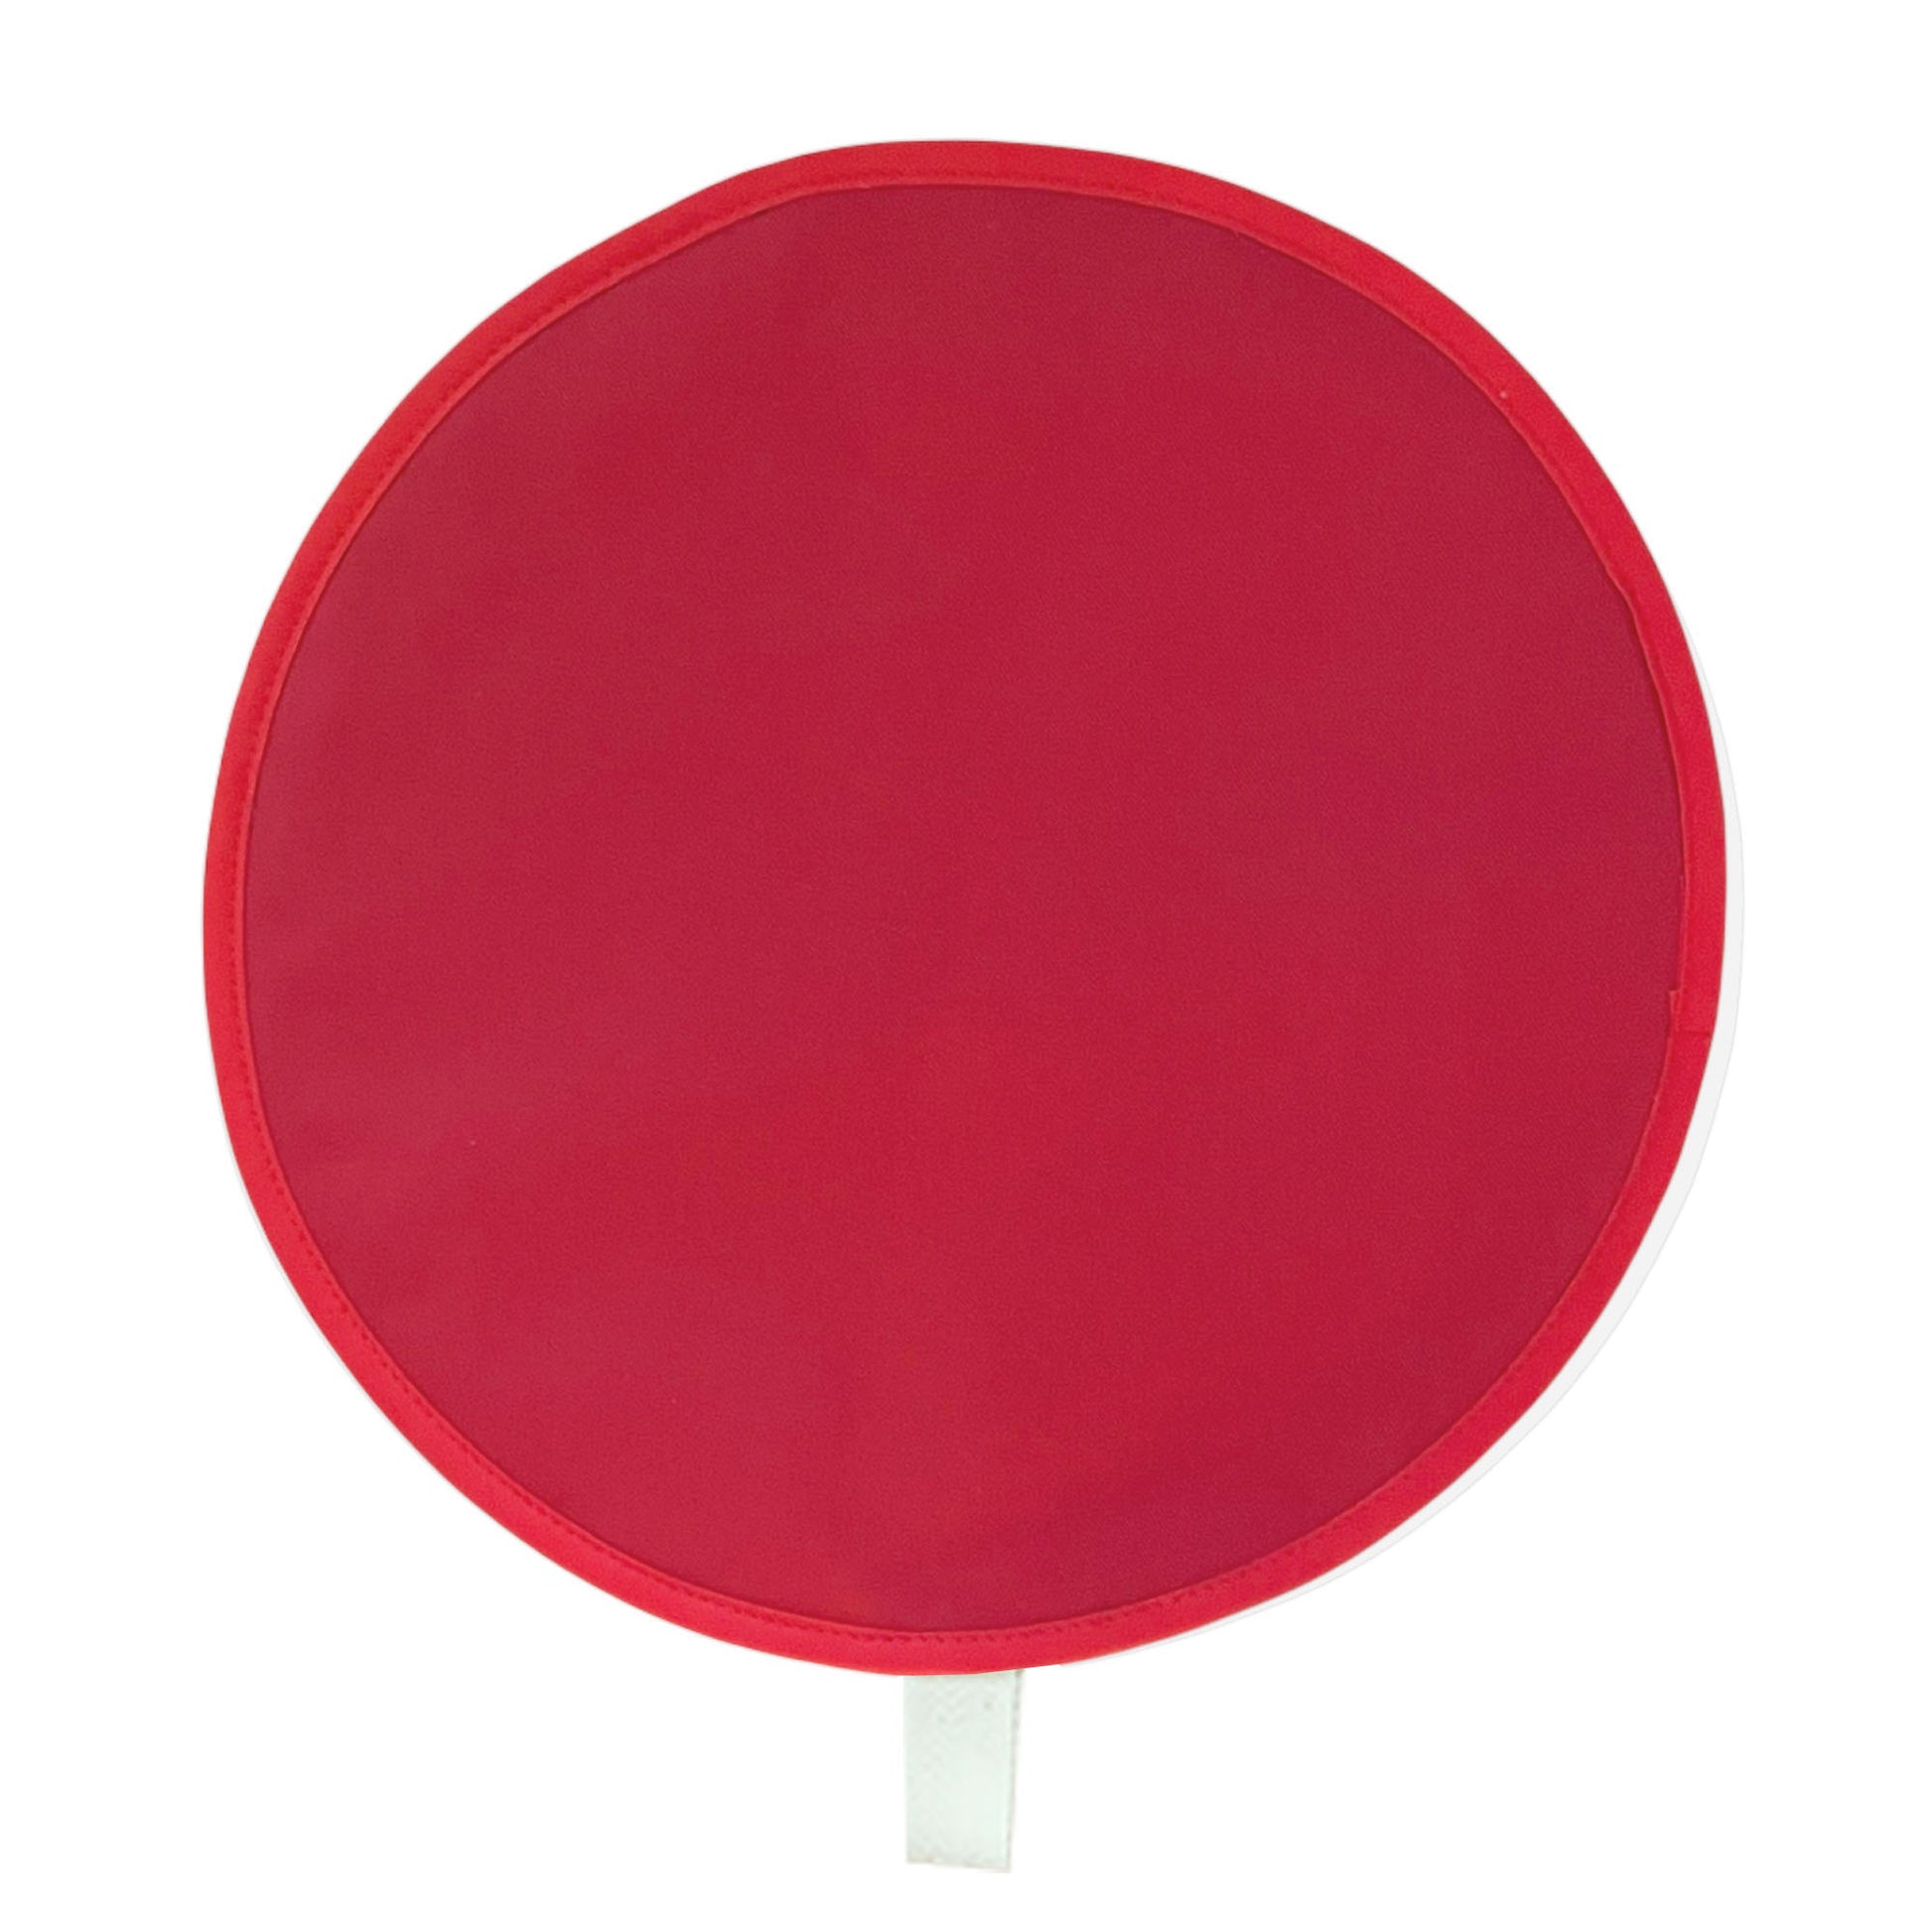 Chef Pad - Aga - The Chef Pad Shop - Plain Red Chef Pad for use with Aga Range Cookers